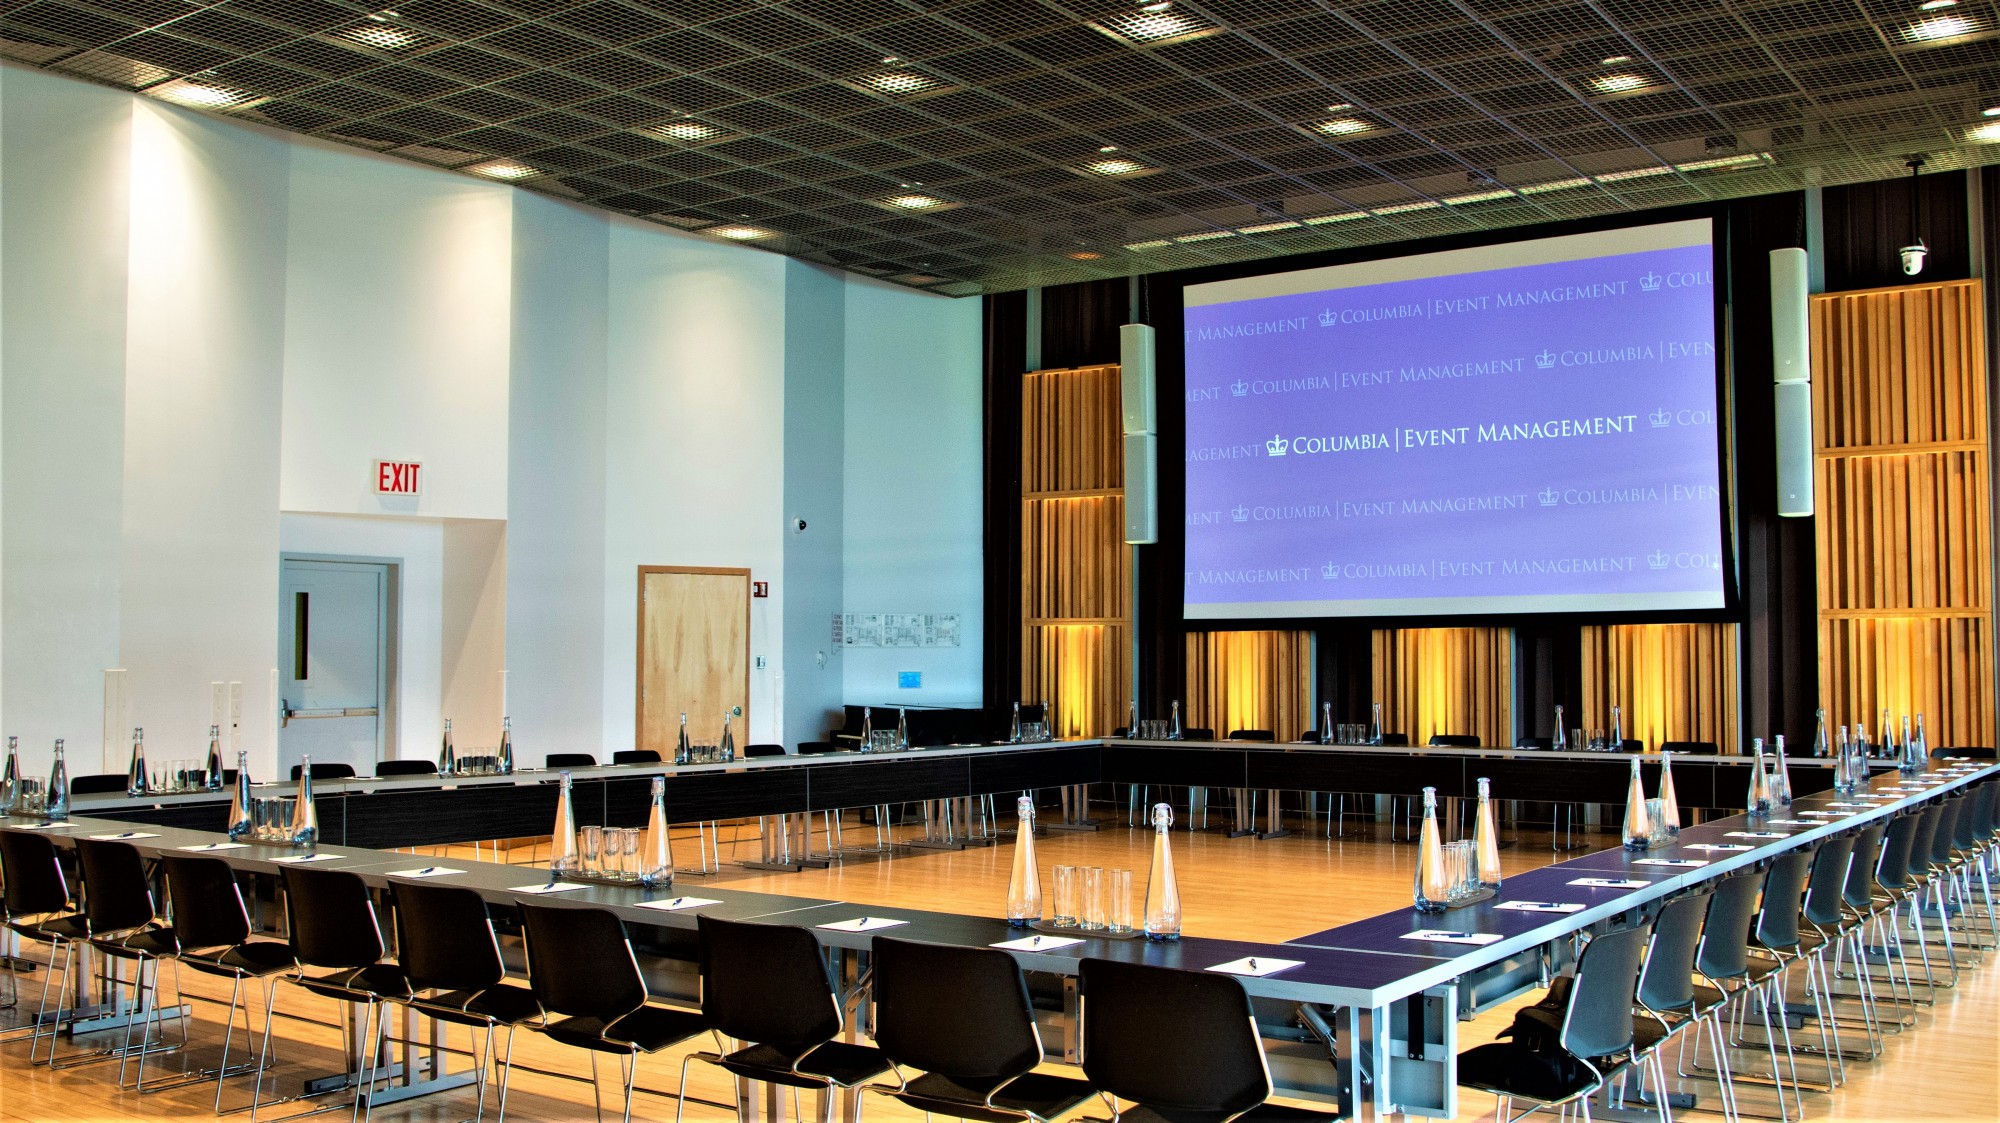 A large room has long tables arranged into a square shape. The tables are set with water glasses and pitchers. On one wall, a projector screen displays text, "Columbia University"